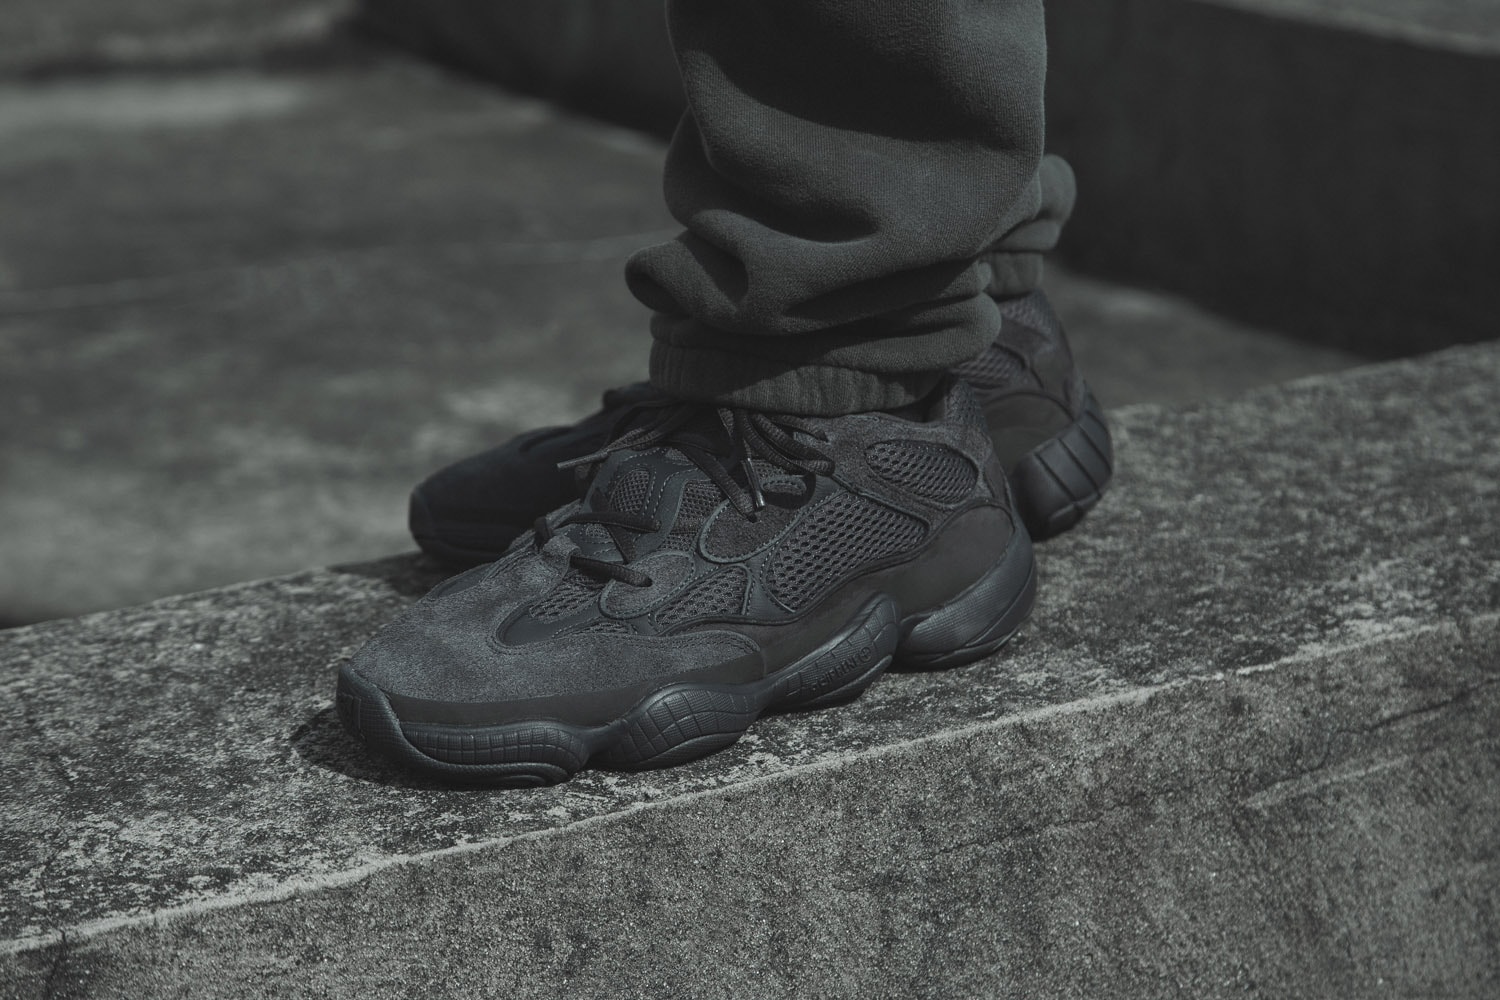 Adidas restock yeezy 500 utility black restock release when do they drop where to buy them 2020 new release how much